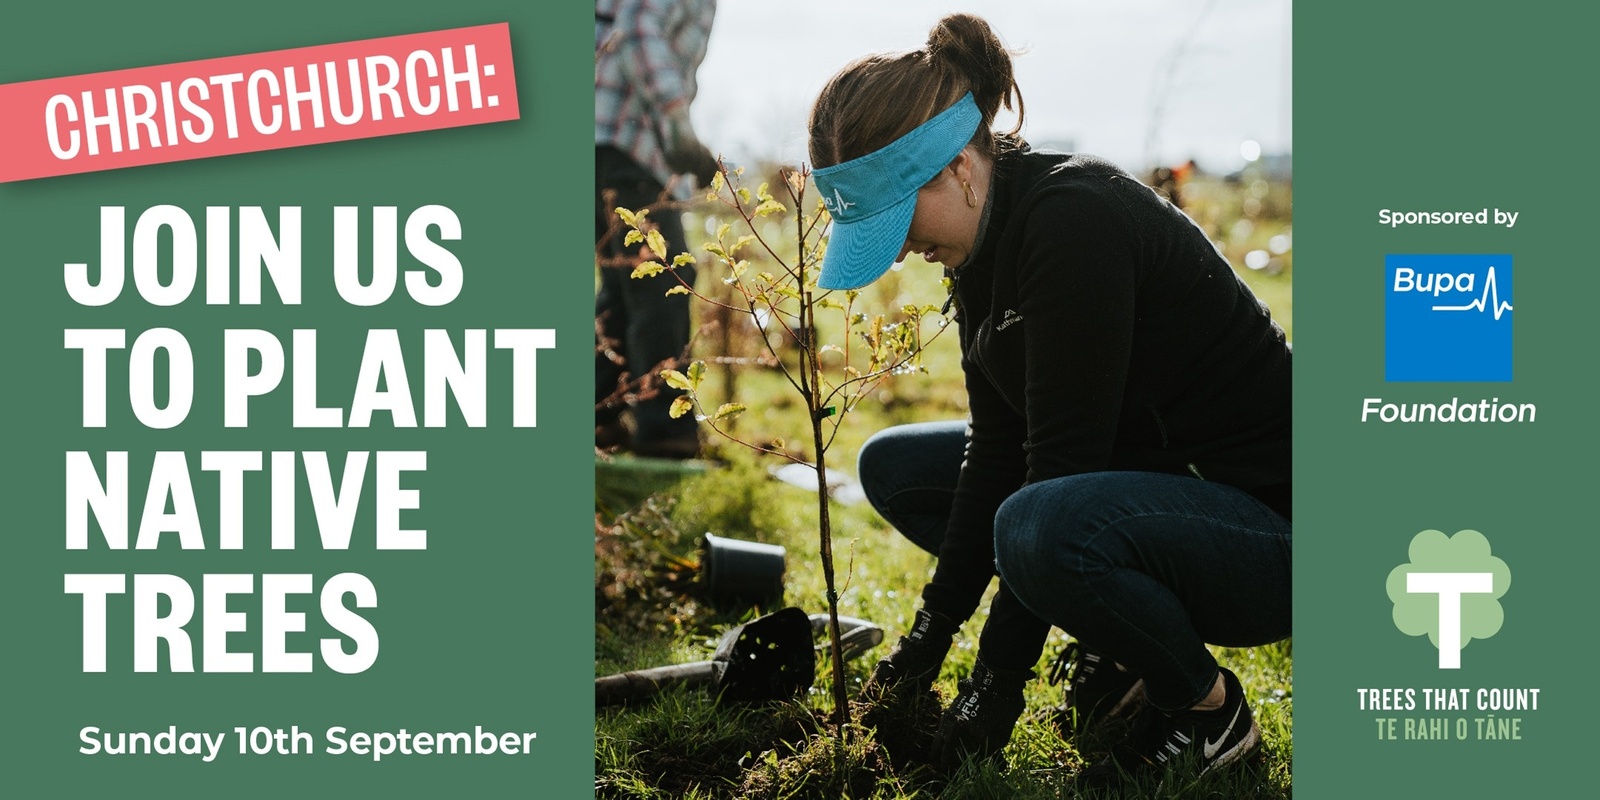 Banner image for Christchurch Community Planting Day - sponsored by Bupa